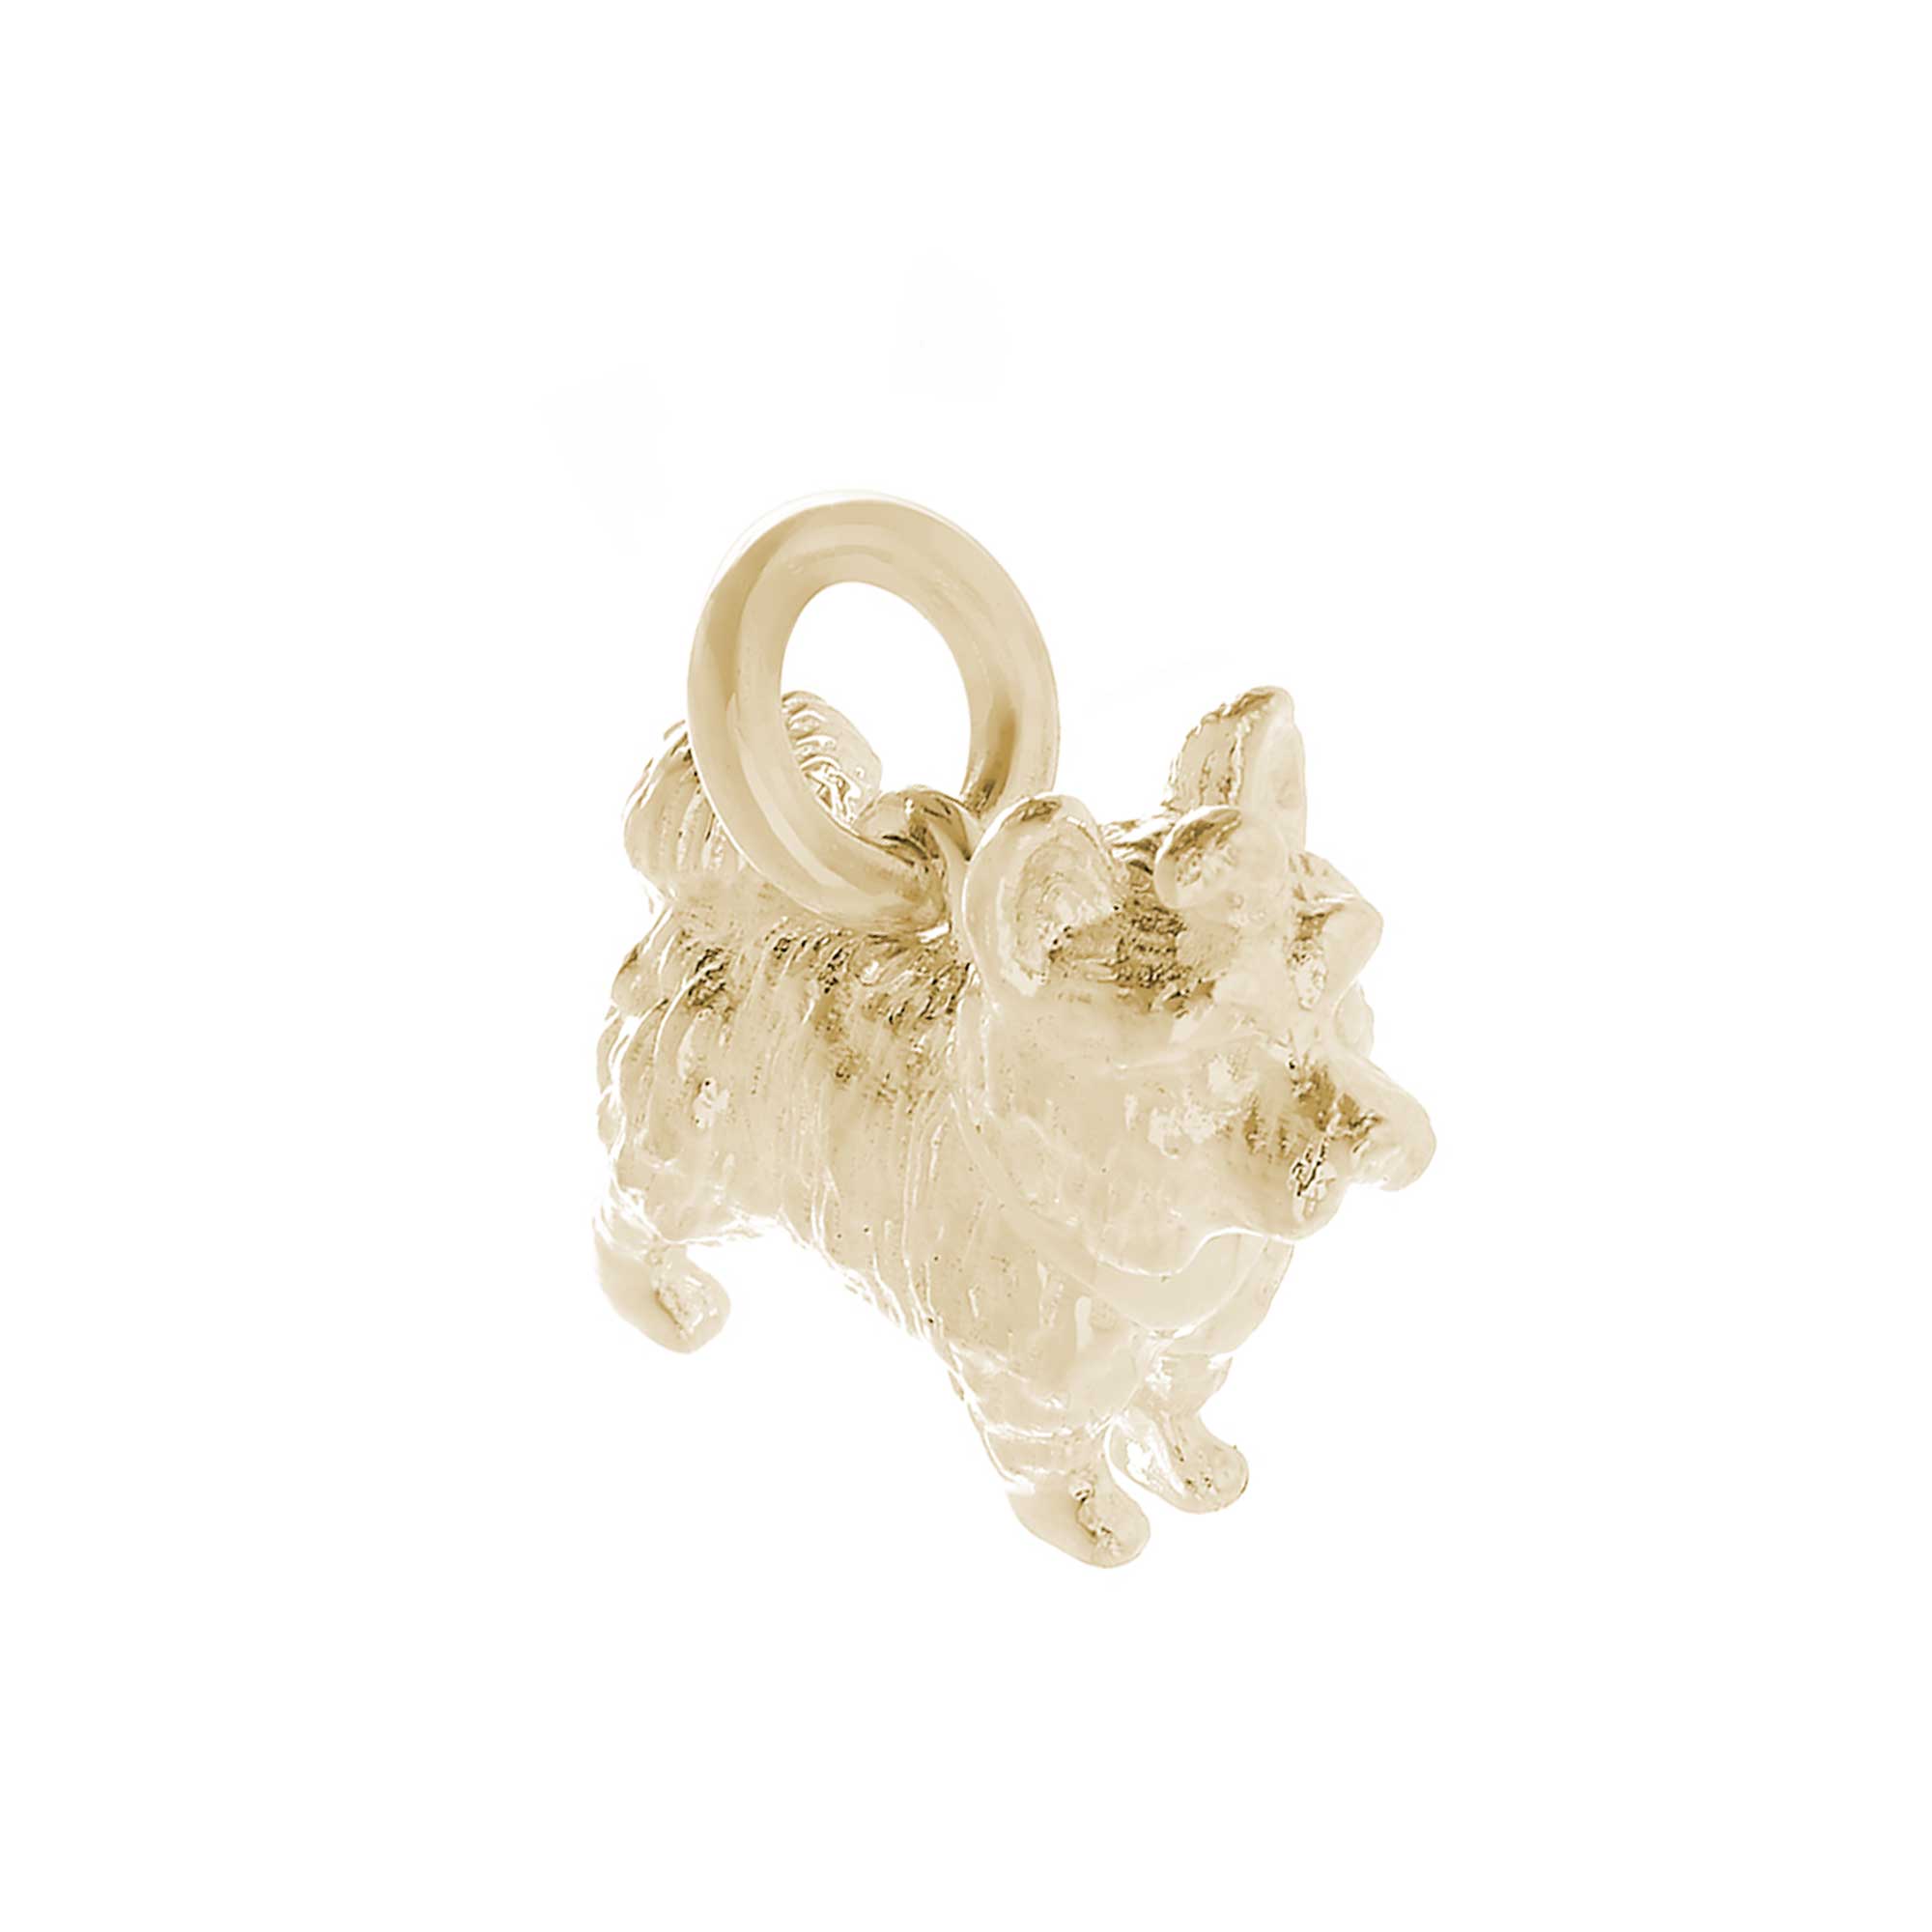 solid 9ct gold yorkshire terrier dog charm scarlett jewellery